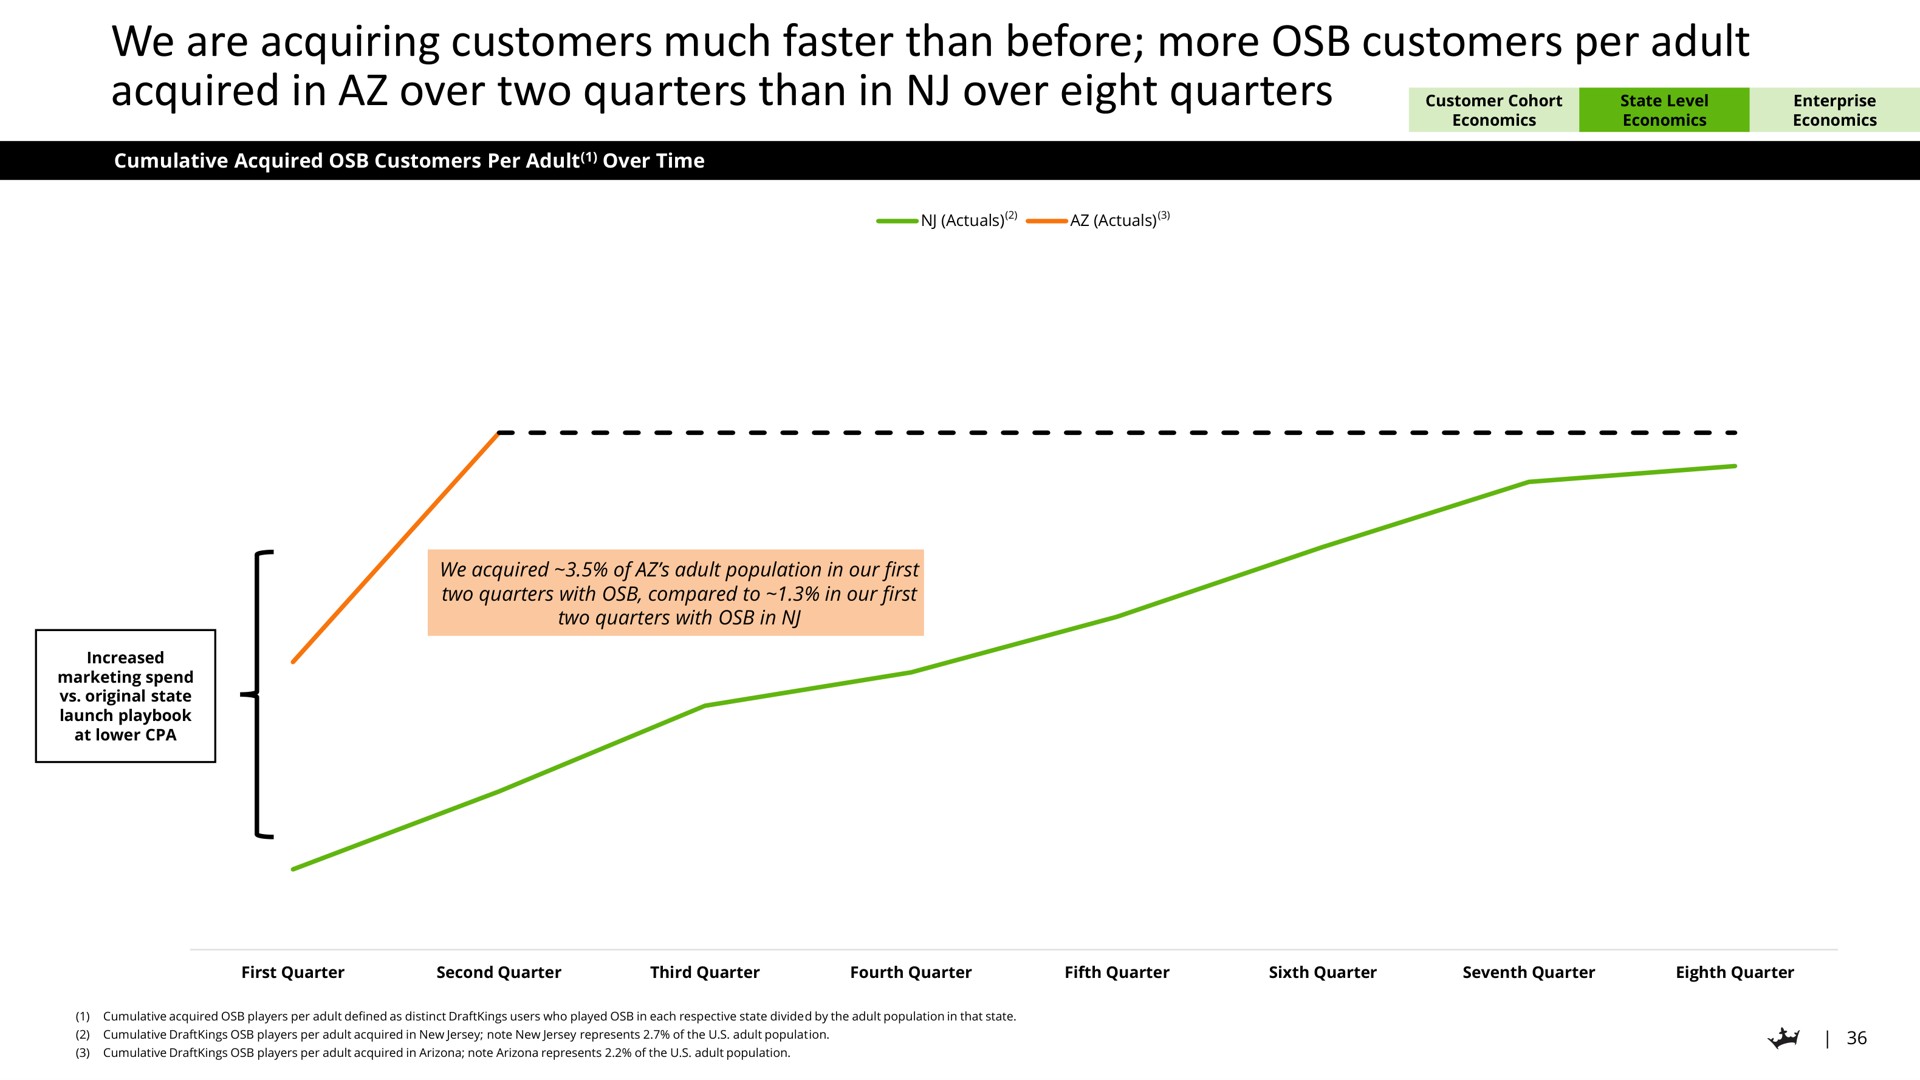 we are acquiring customers much faster than before more customers per adult acquired in over two quarters than in over eight quarters customer cohort | DraftKings